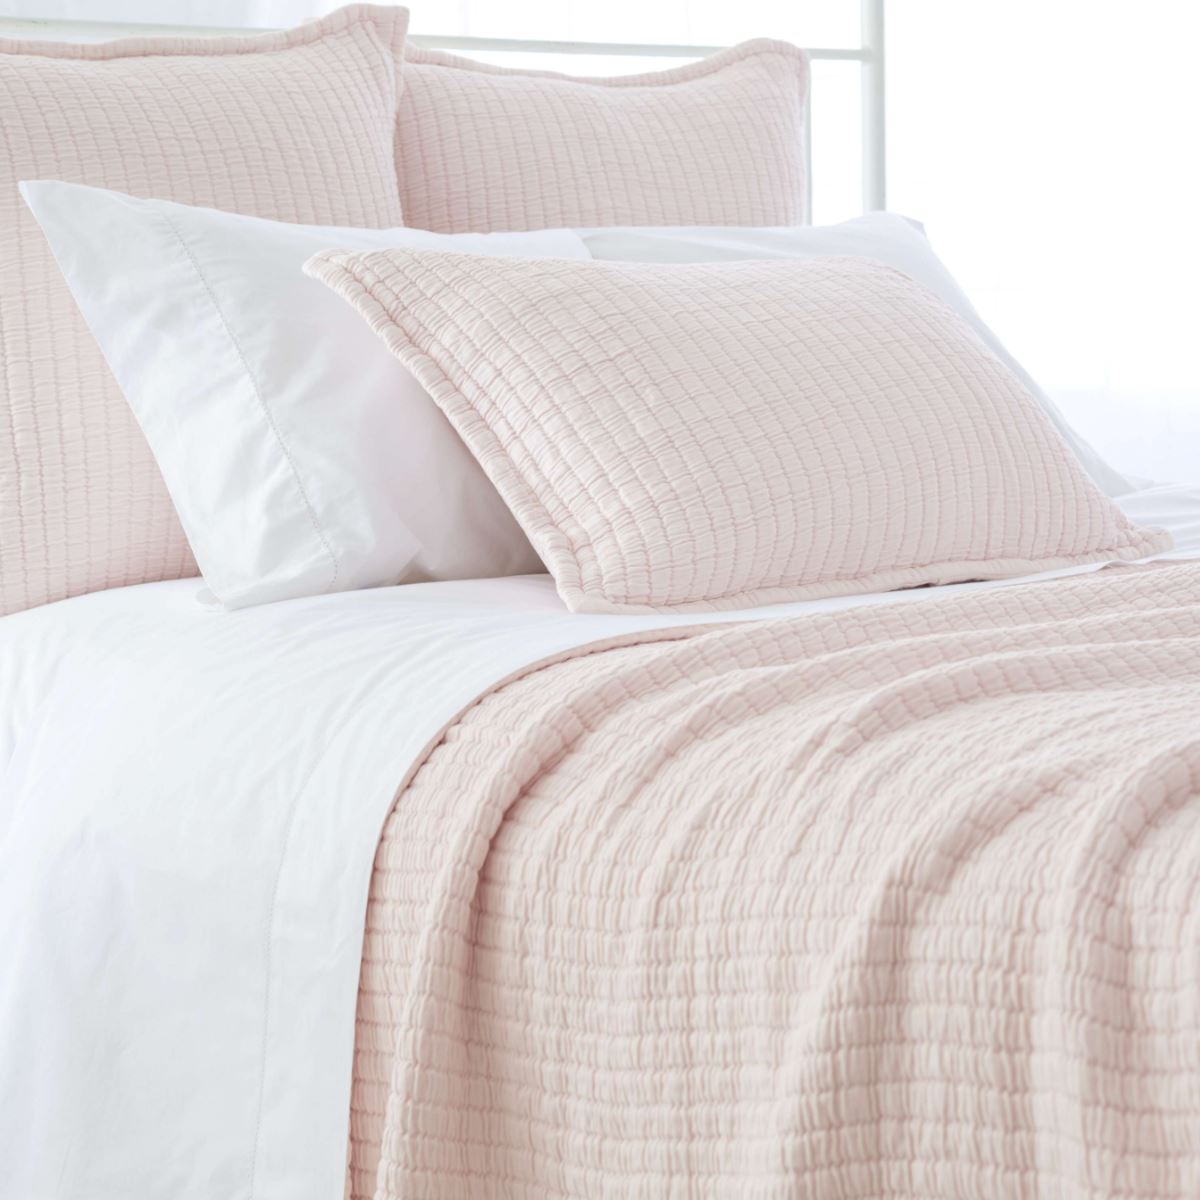 Boyfriend Slipper Pink Matelasse Coverlet styled with floral sheets. Styled view. 